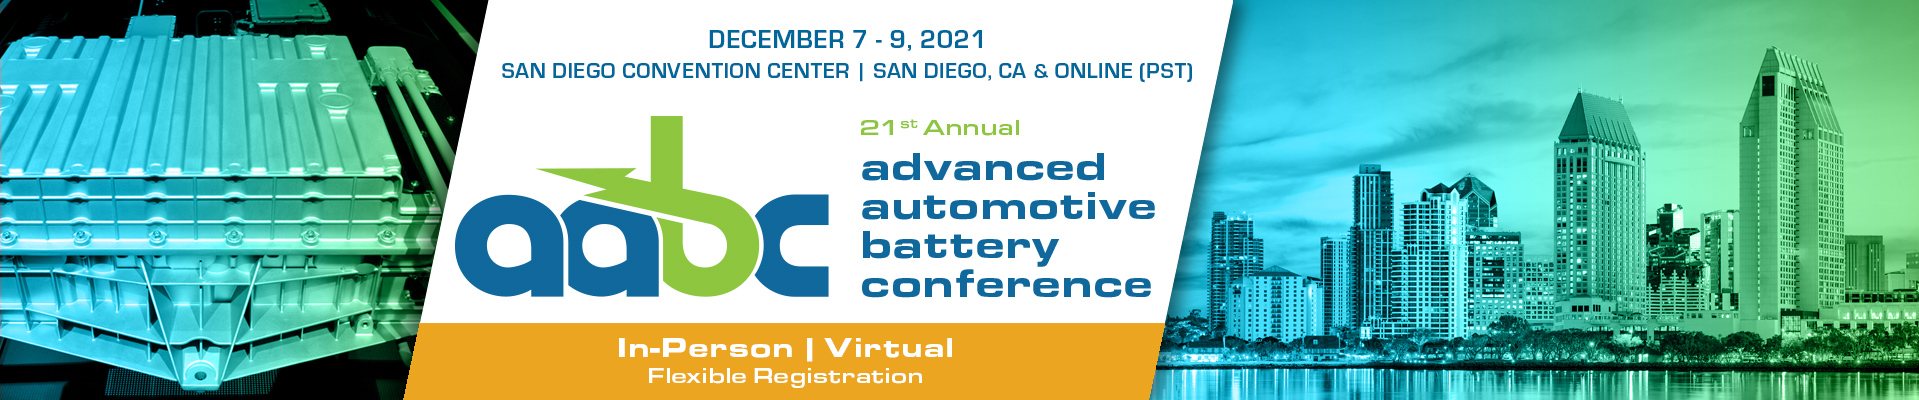 Advanced Automotive Battery Conference Image Banner